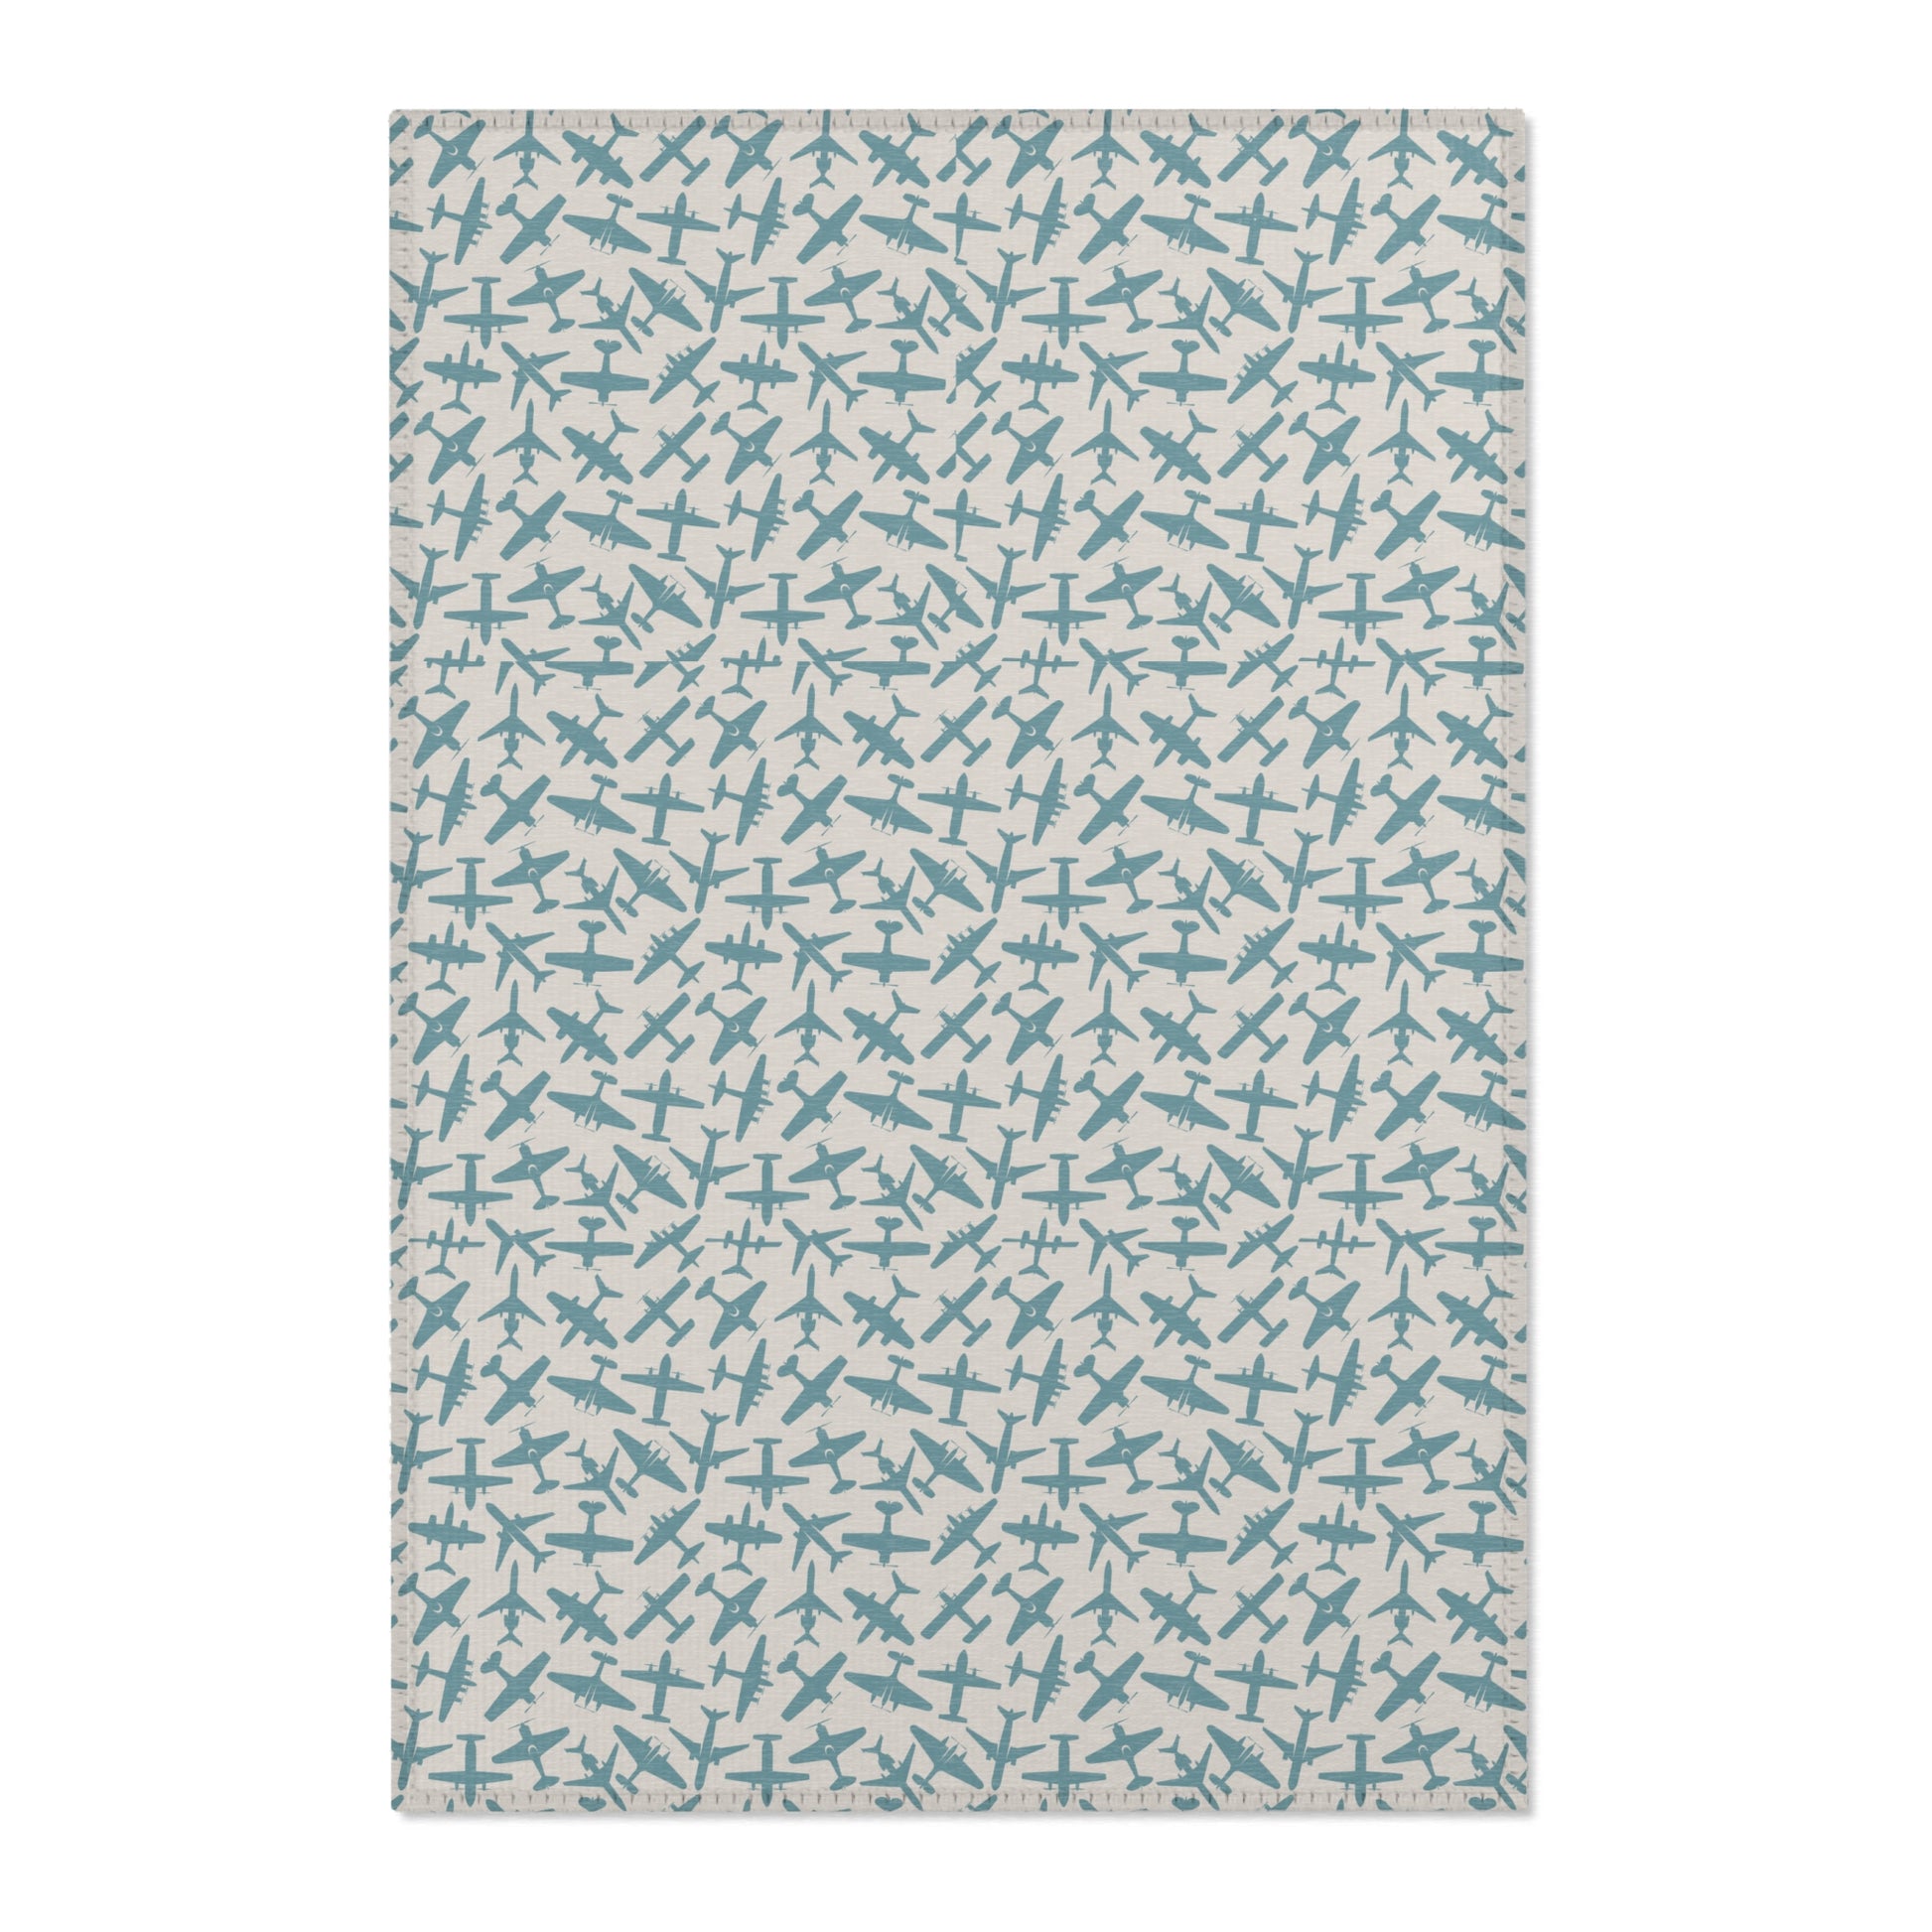 aviation merchandise, airplane patterned aviation area rug